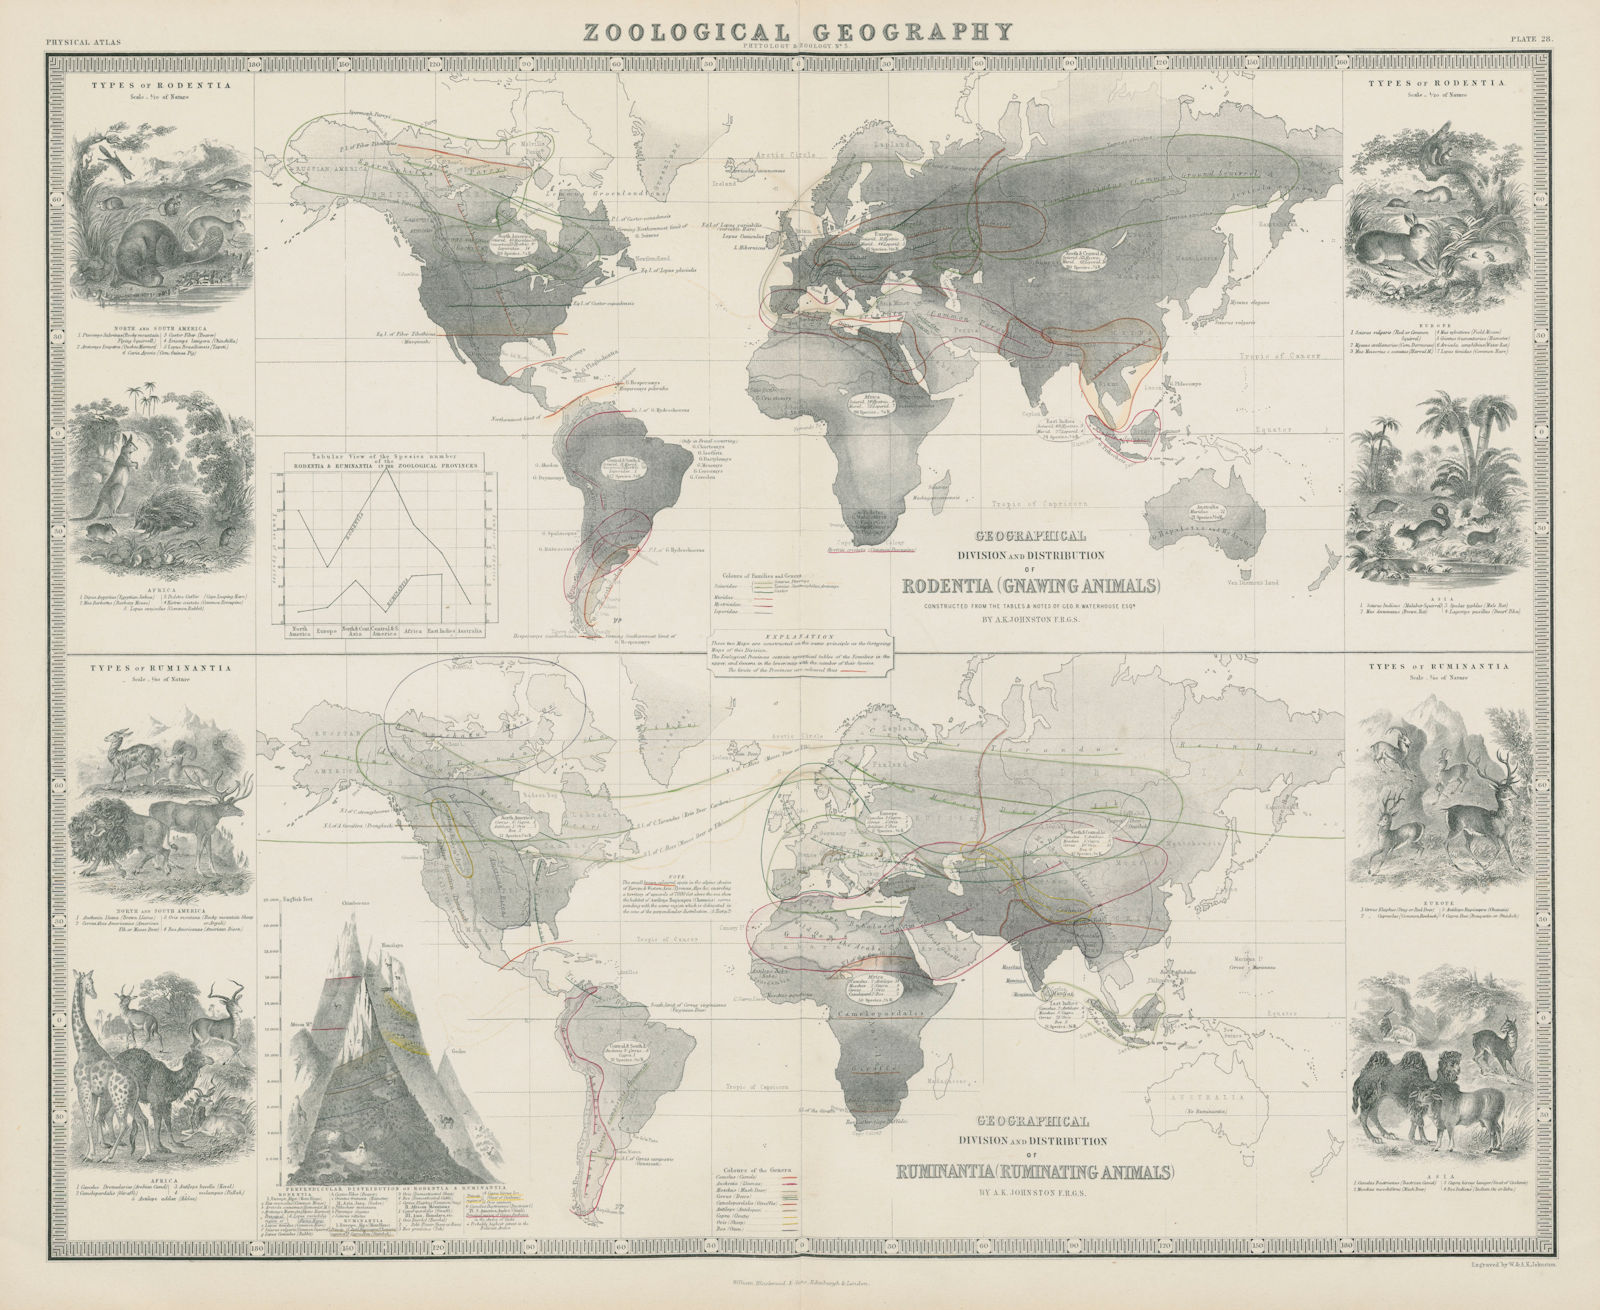 Zoological Geography. Rodentia & Ruminantia distribution 1856 old antique map